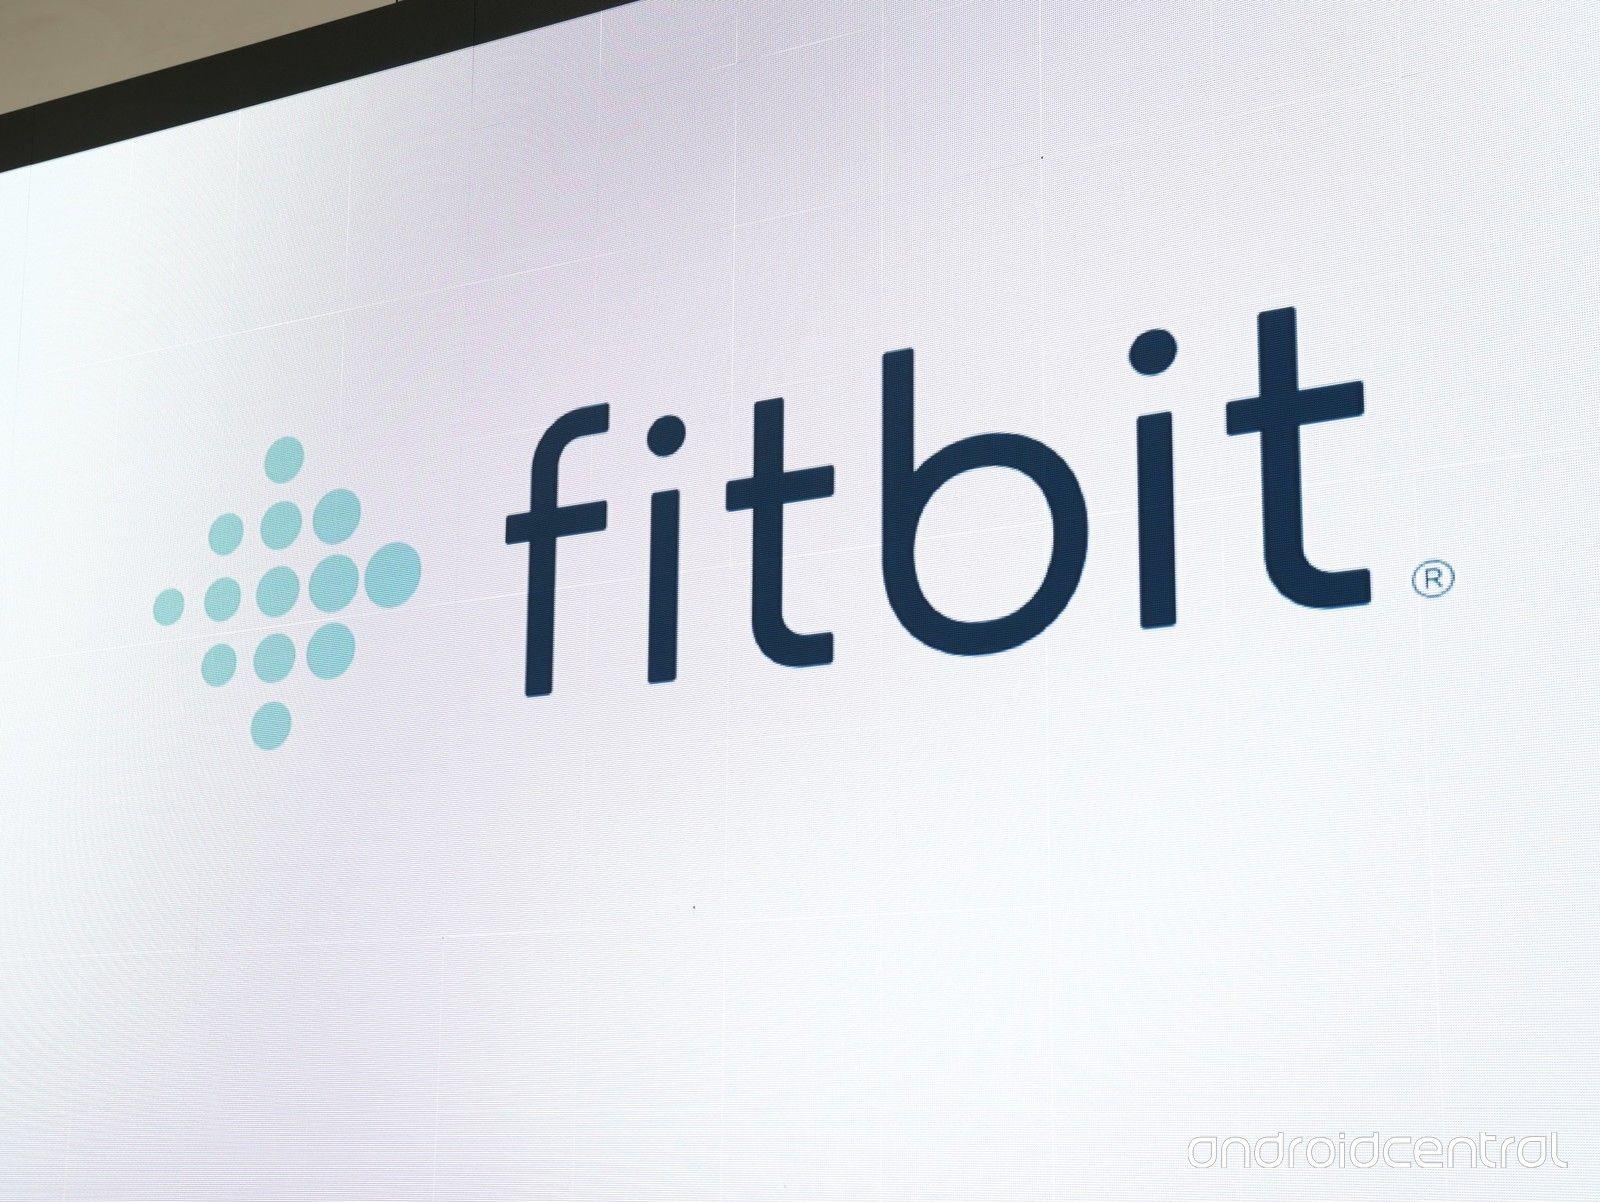 Jawbone Logo - Six Fitbit employees have been charged with stealing Jawbone trade